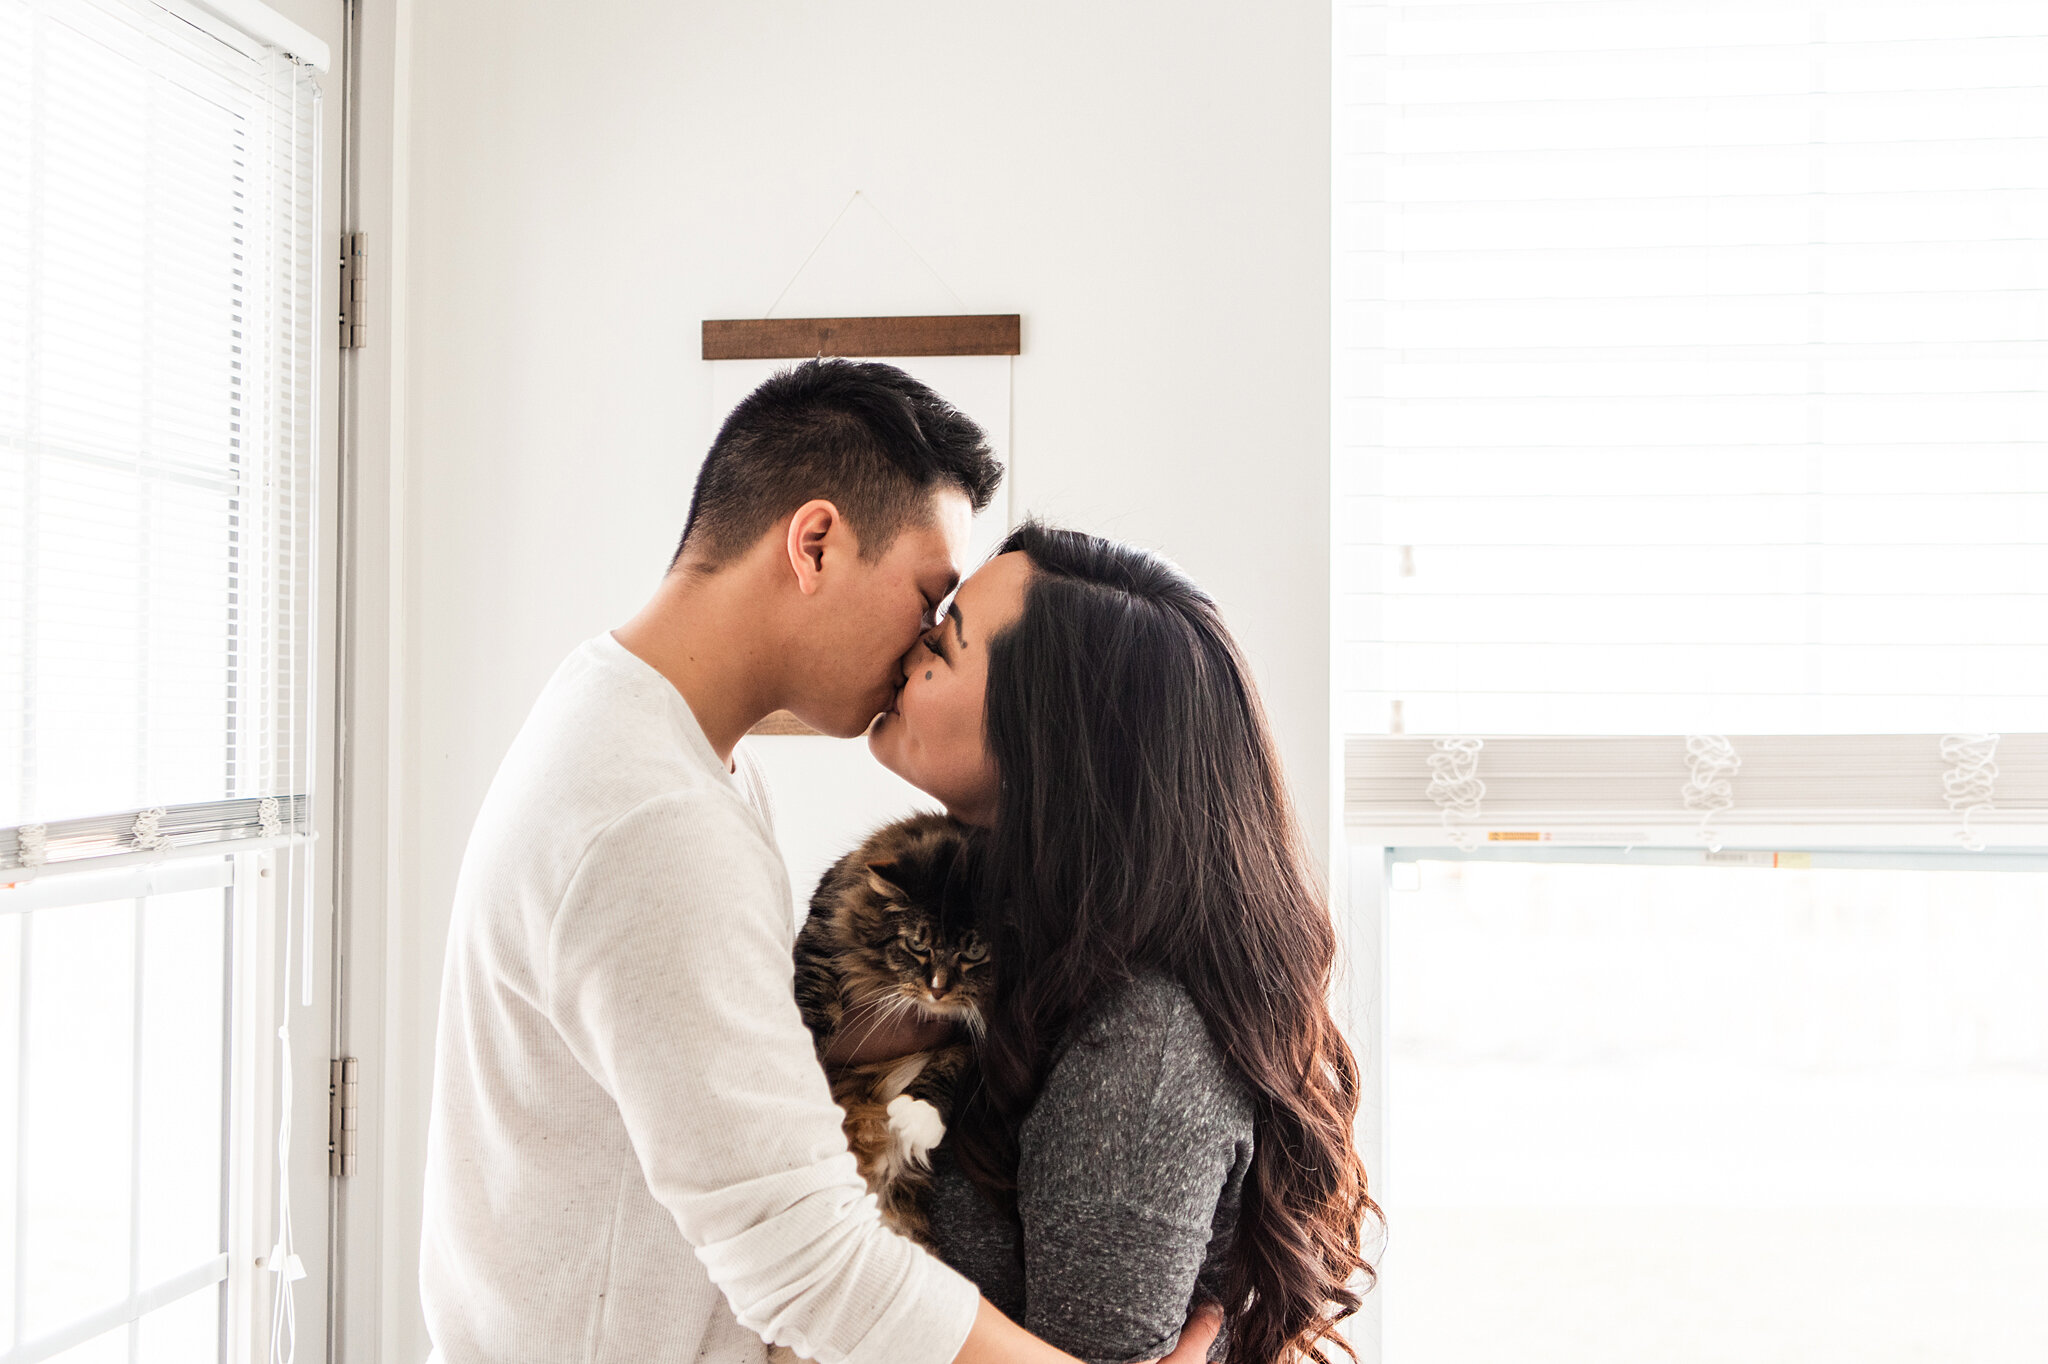 In_Home_Rochester_Couples_Session_JILL_STUDIO_Rochester_NY_Photographer_4174.jpg